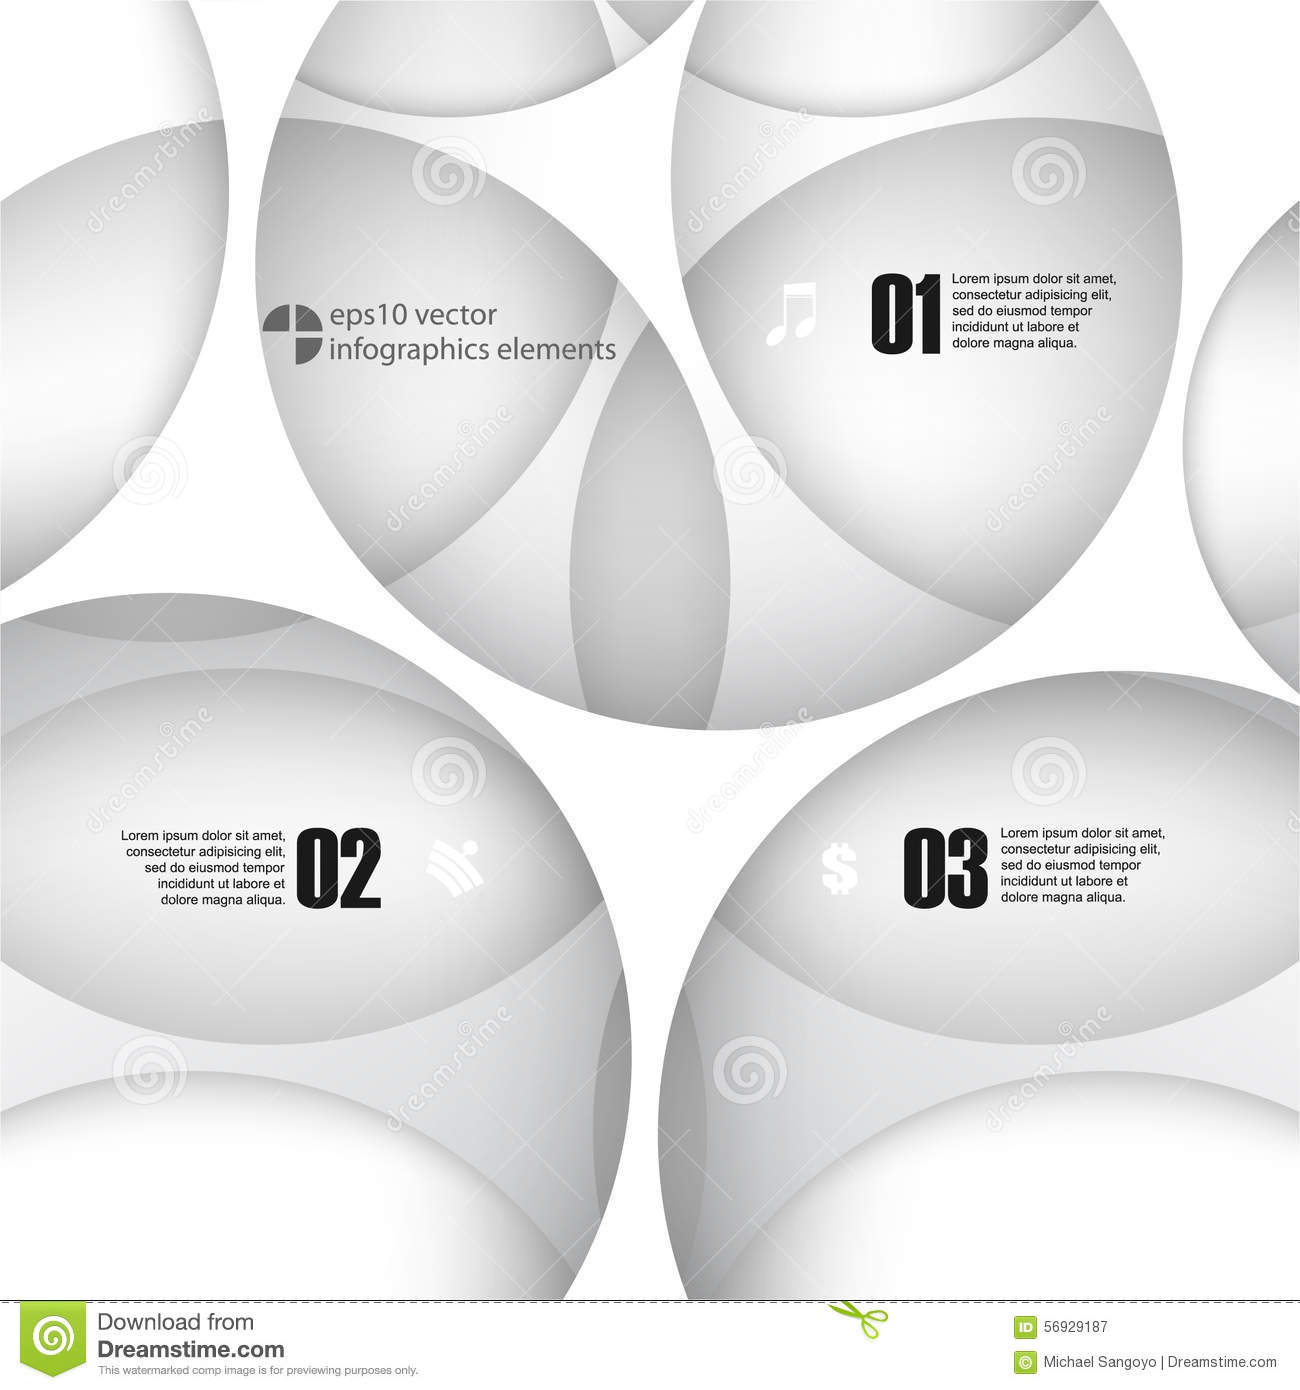 Clean white infographic overlay | Modern infographic, Infographic, Diagram design